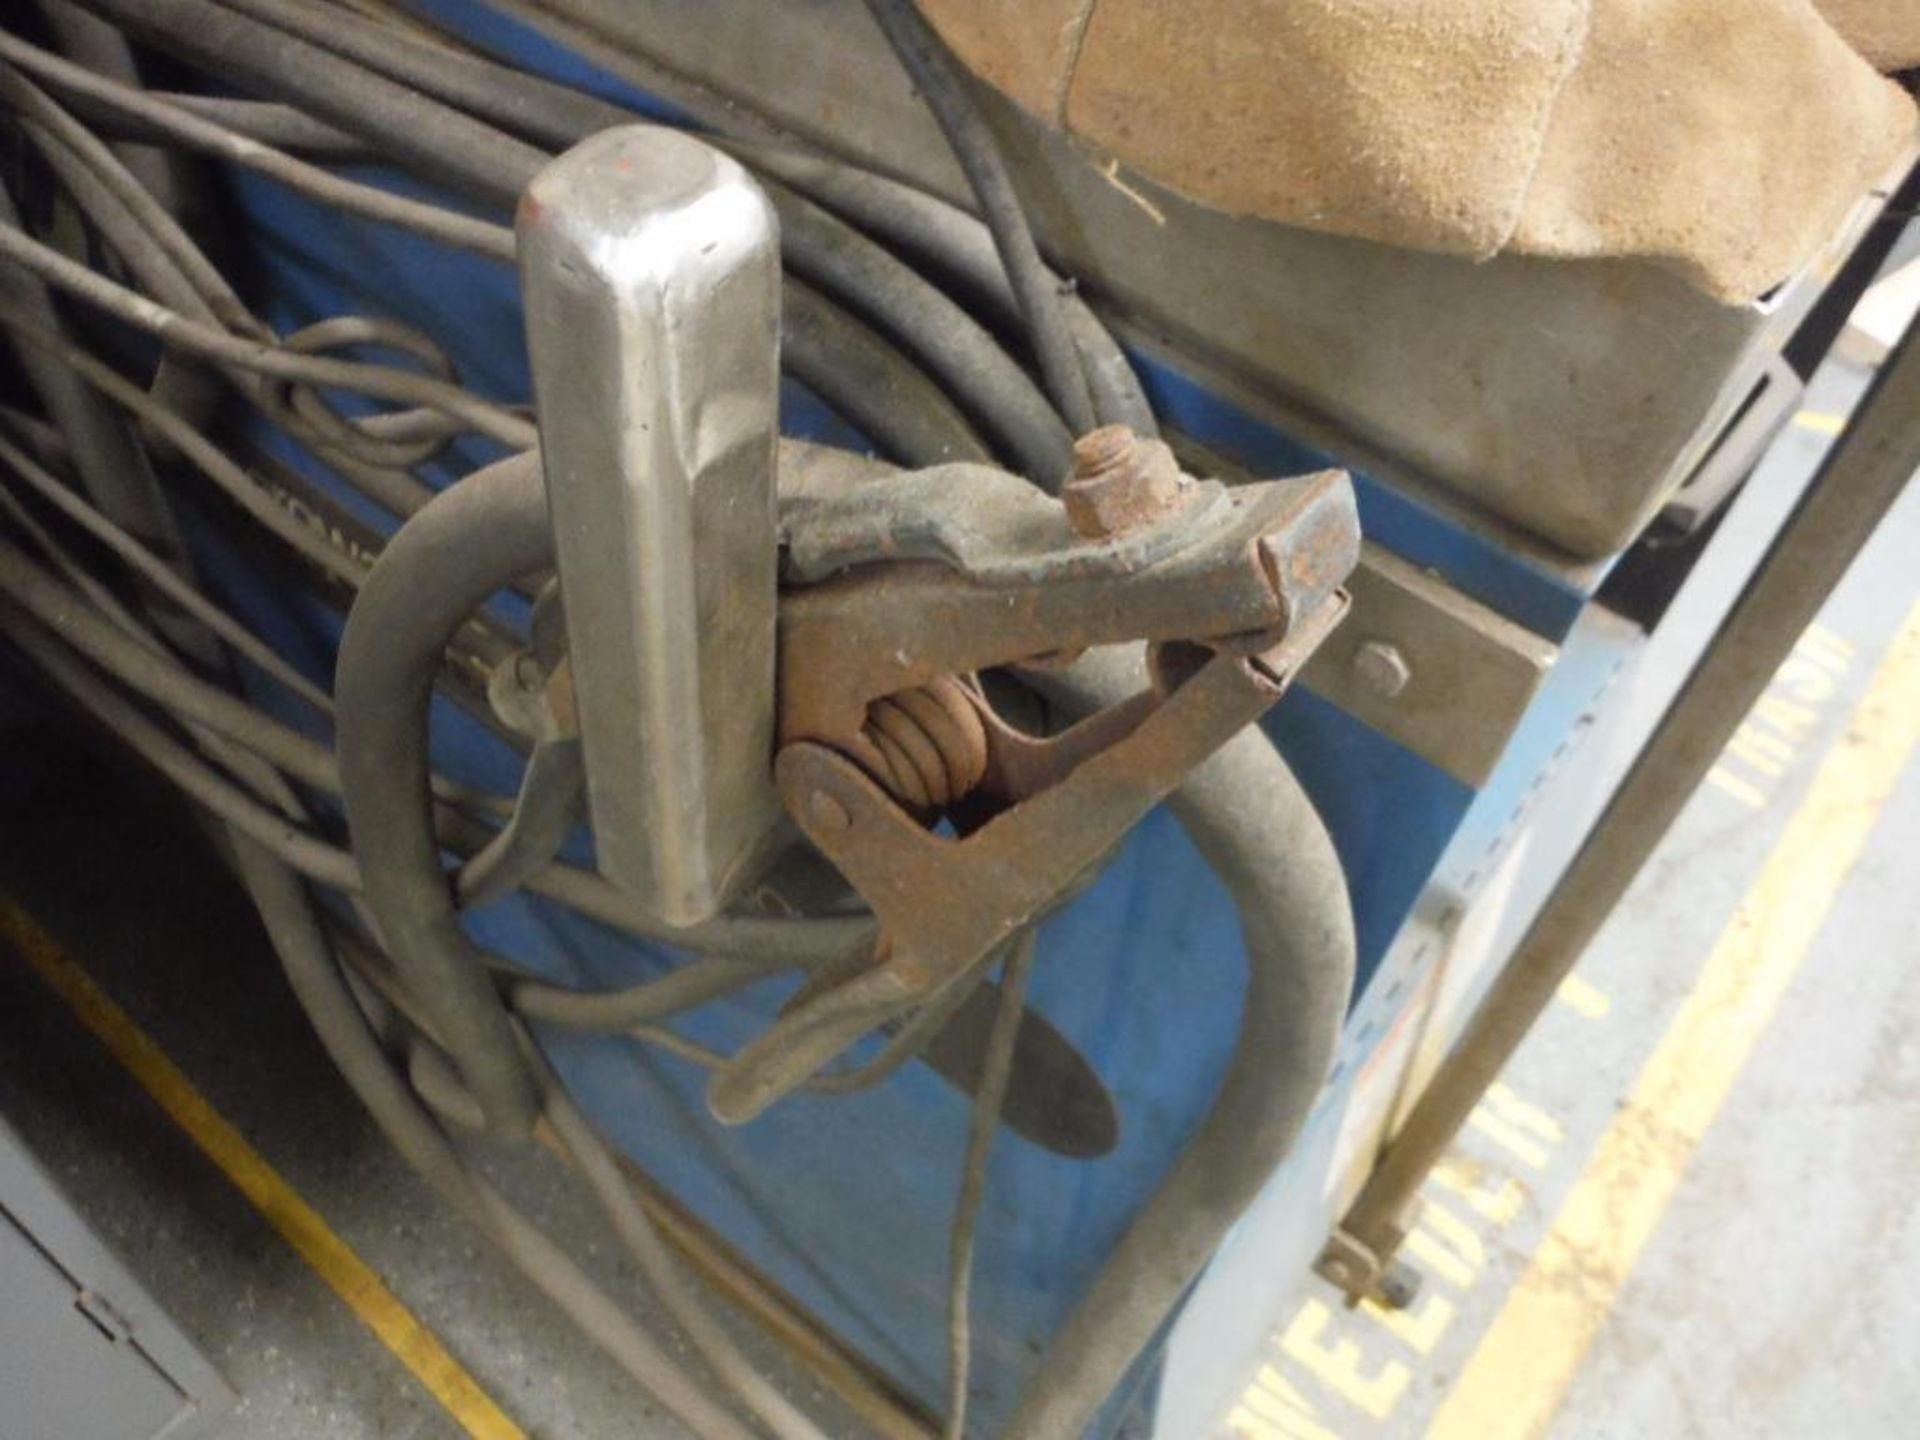 Miller synchro wave 250 AC/DC welder, foot control ** Rigging Fee: $25 ** - Image 10 of 11